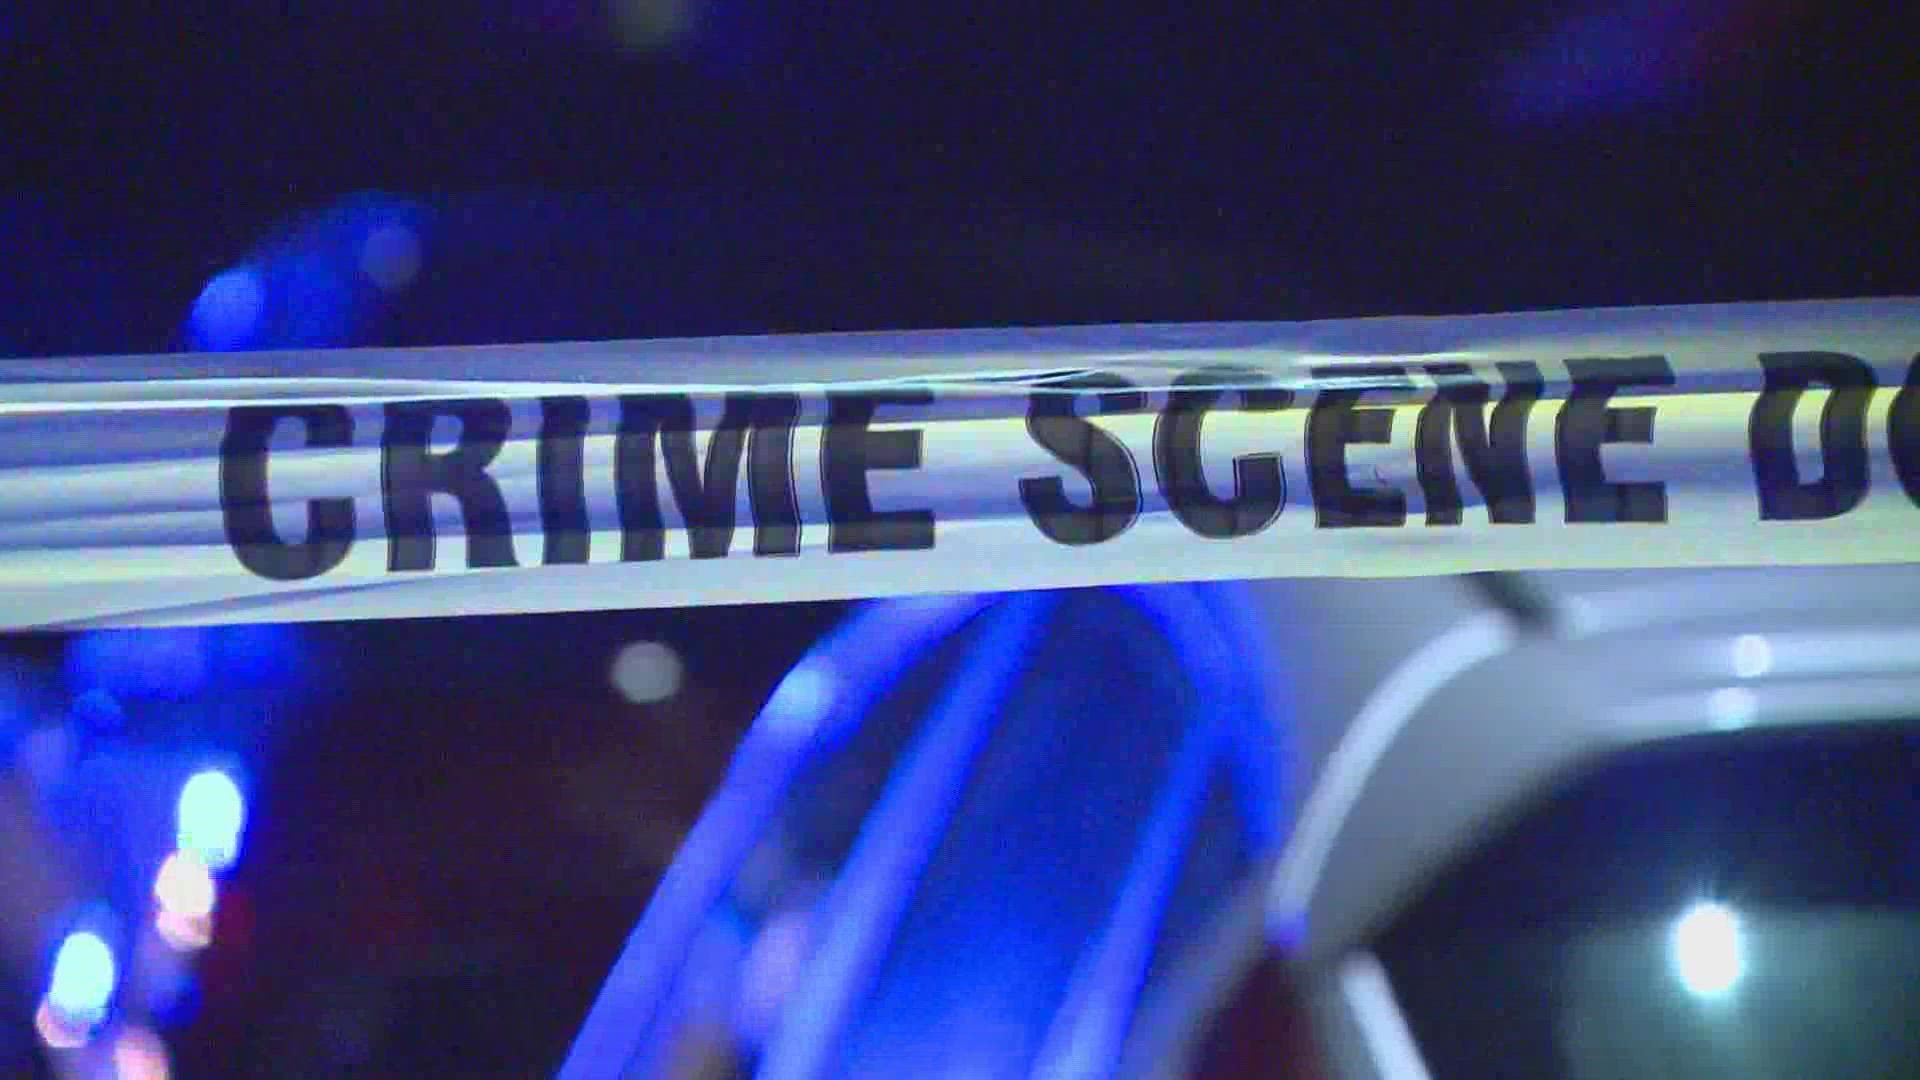 Police said the 15-year-old boy was shot in the back Sunday night near Elmbank and Cora.